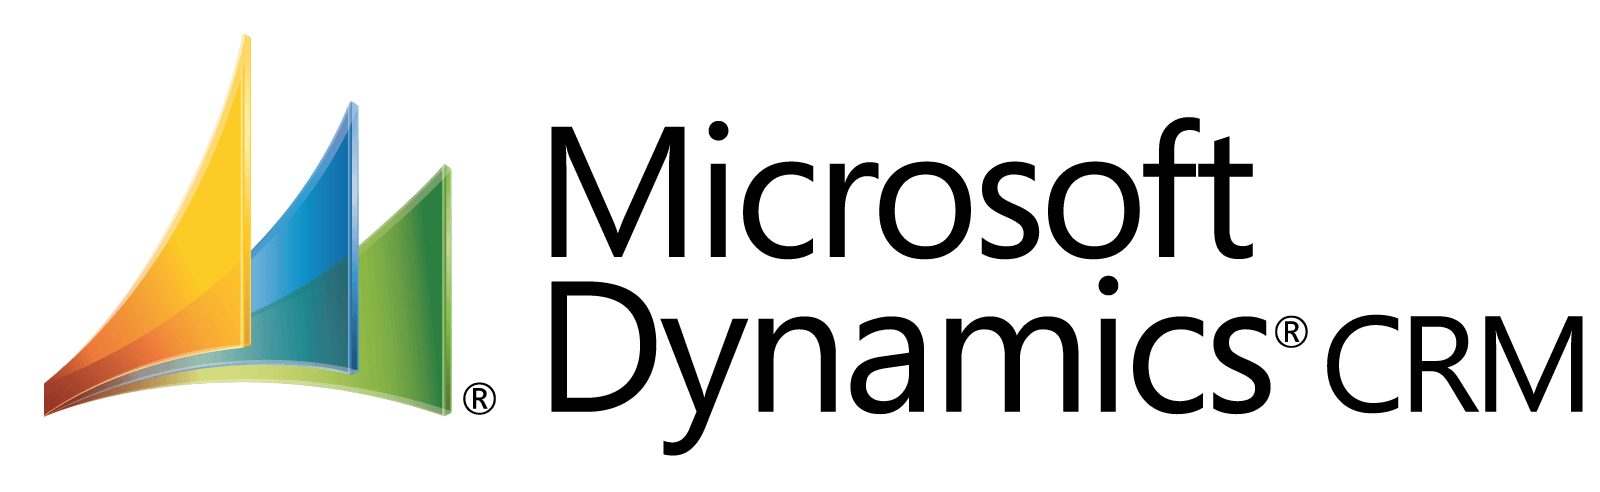 Dynamics CRM 365 Logo - CRM Customisation Services from Alliance Solutions in Hertfordshire